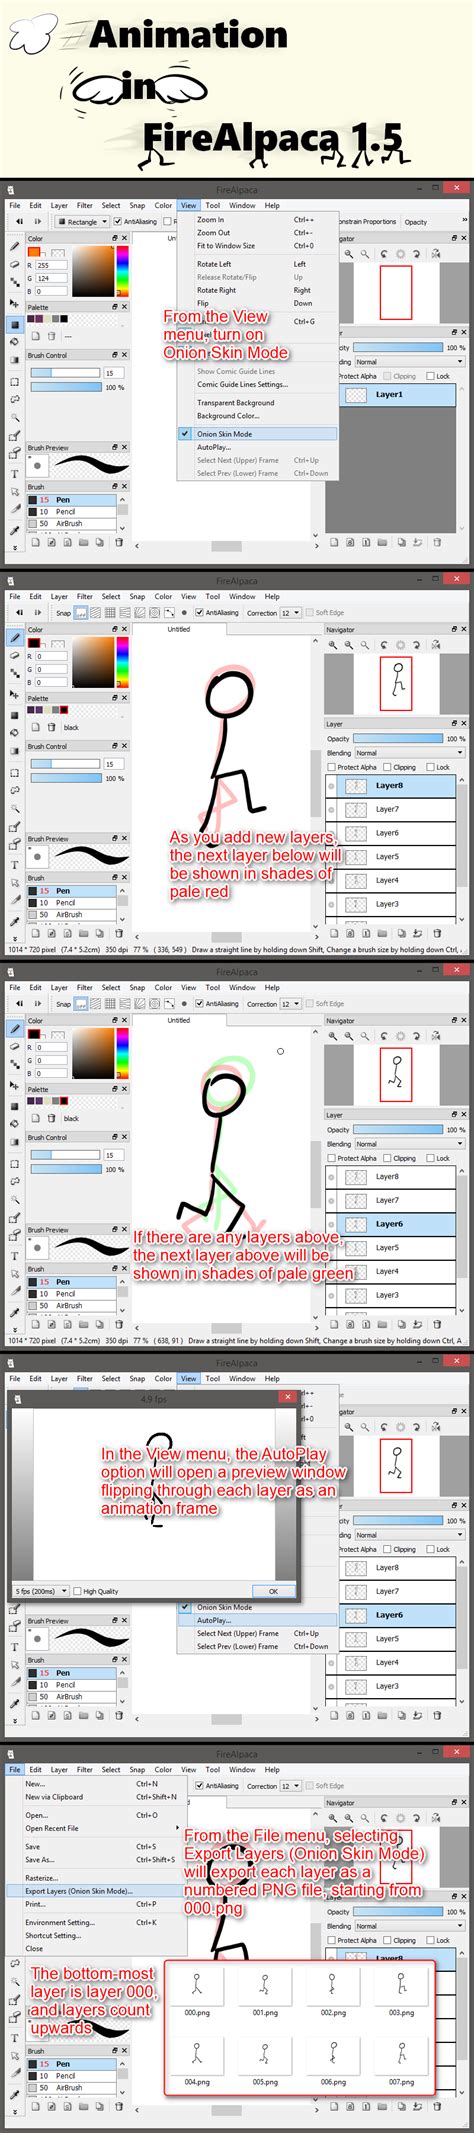 Quick introduction to animation in FireAlpaca 1.5 by obtusity on DeviantArt